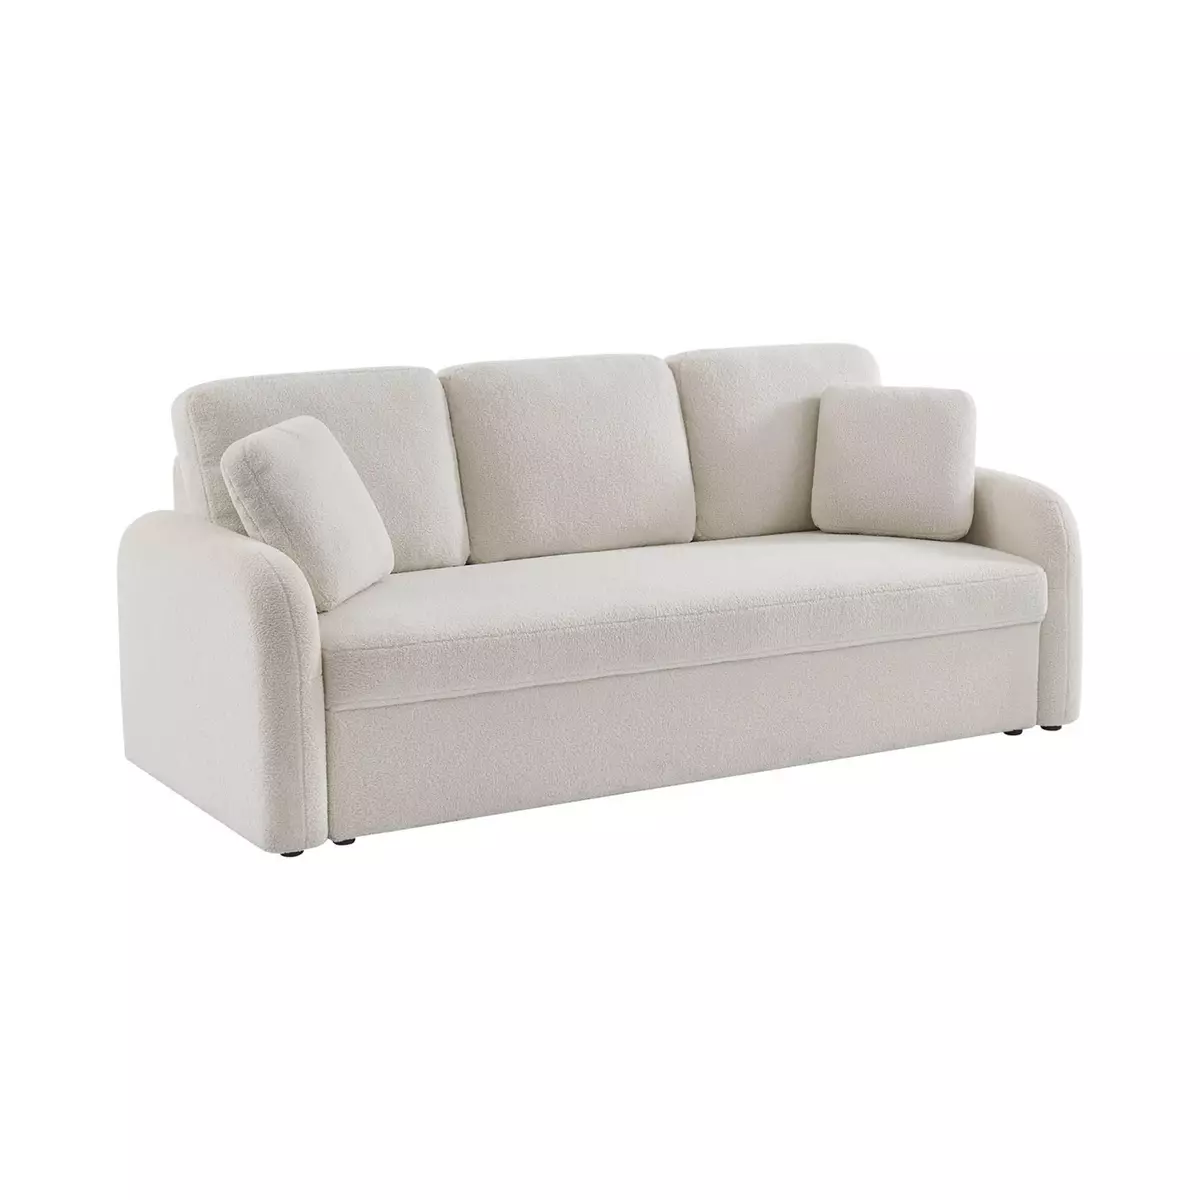 SWEEEK Canapé 3 places cosy rond. tissu bouclettes blanches. Milano. L 210 x P 85 x H 85cm